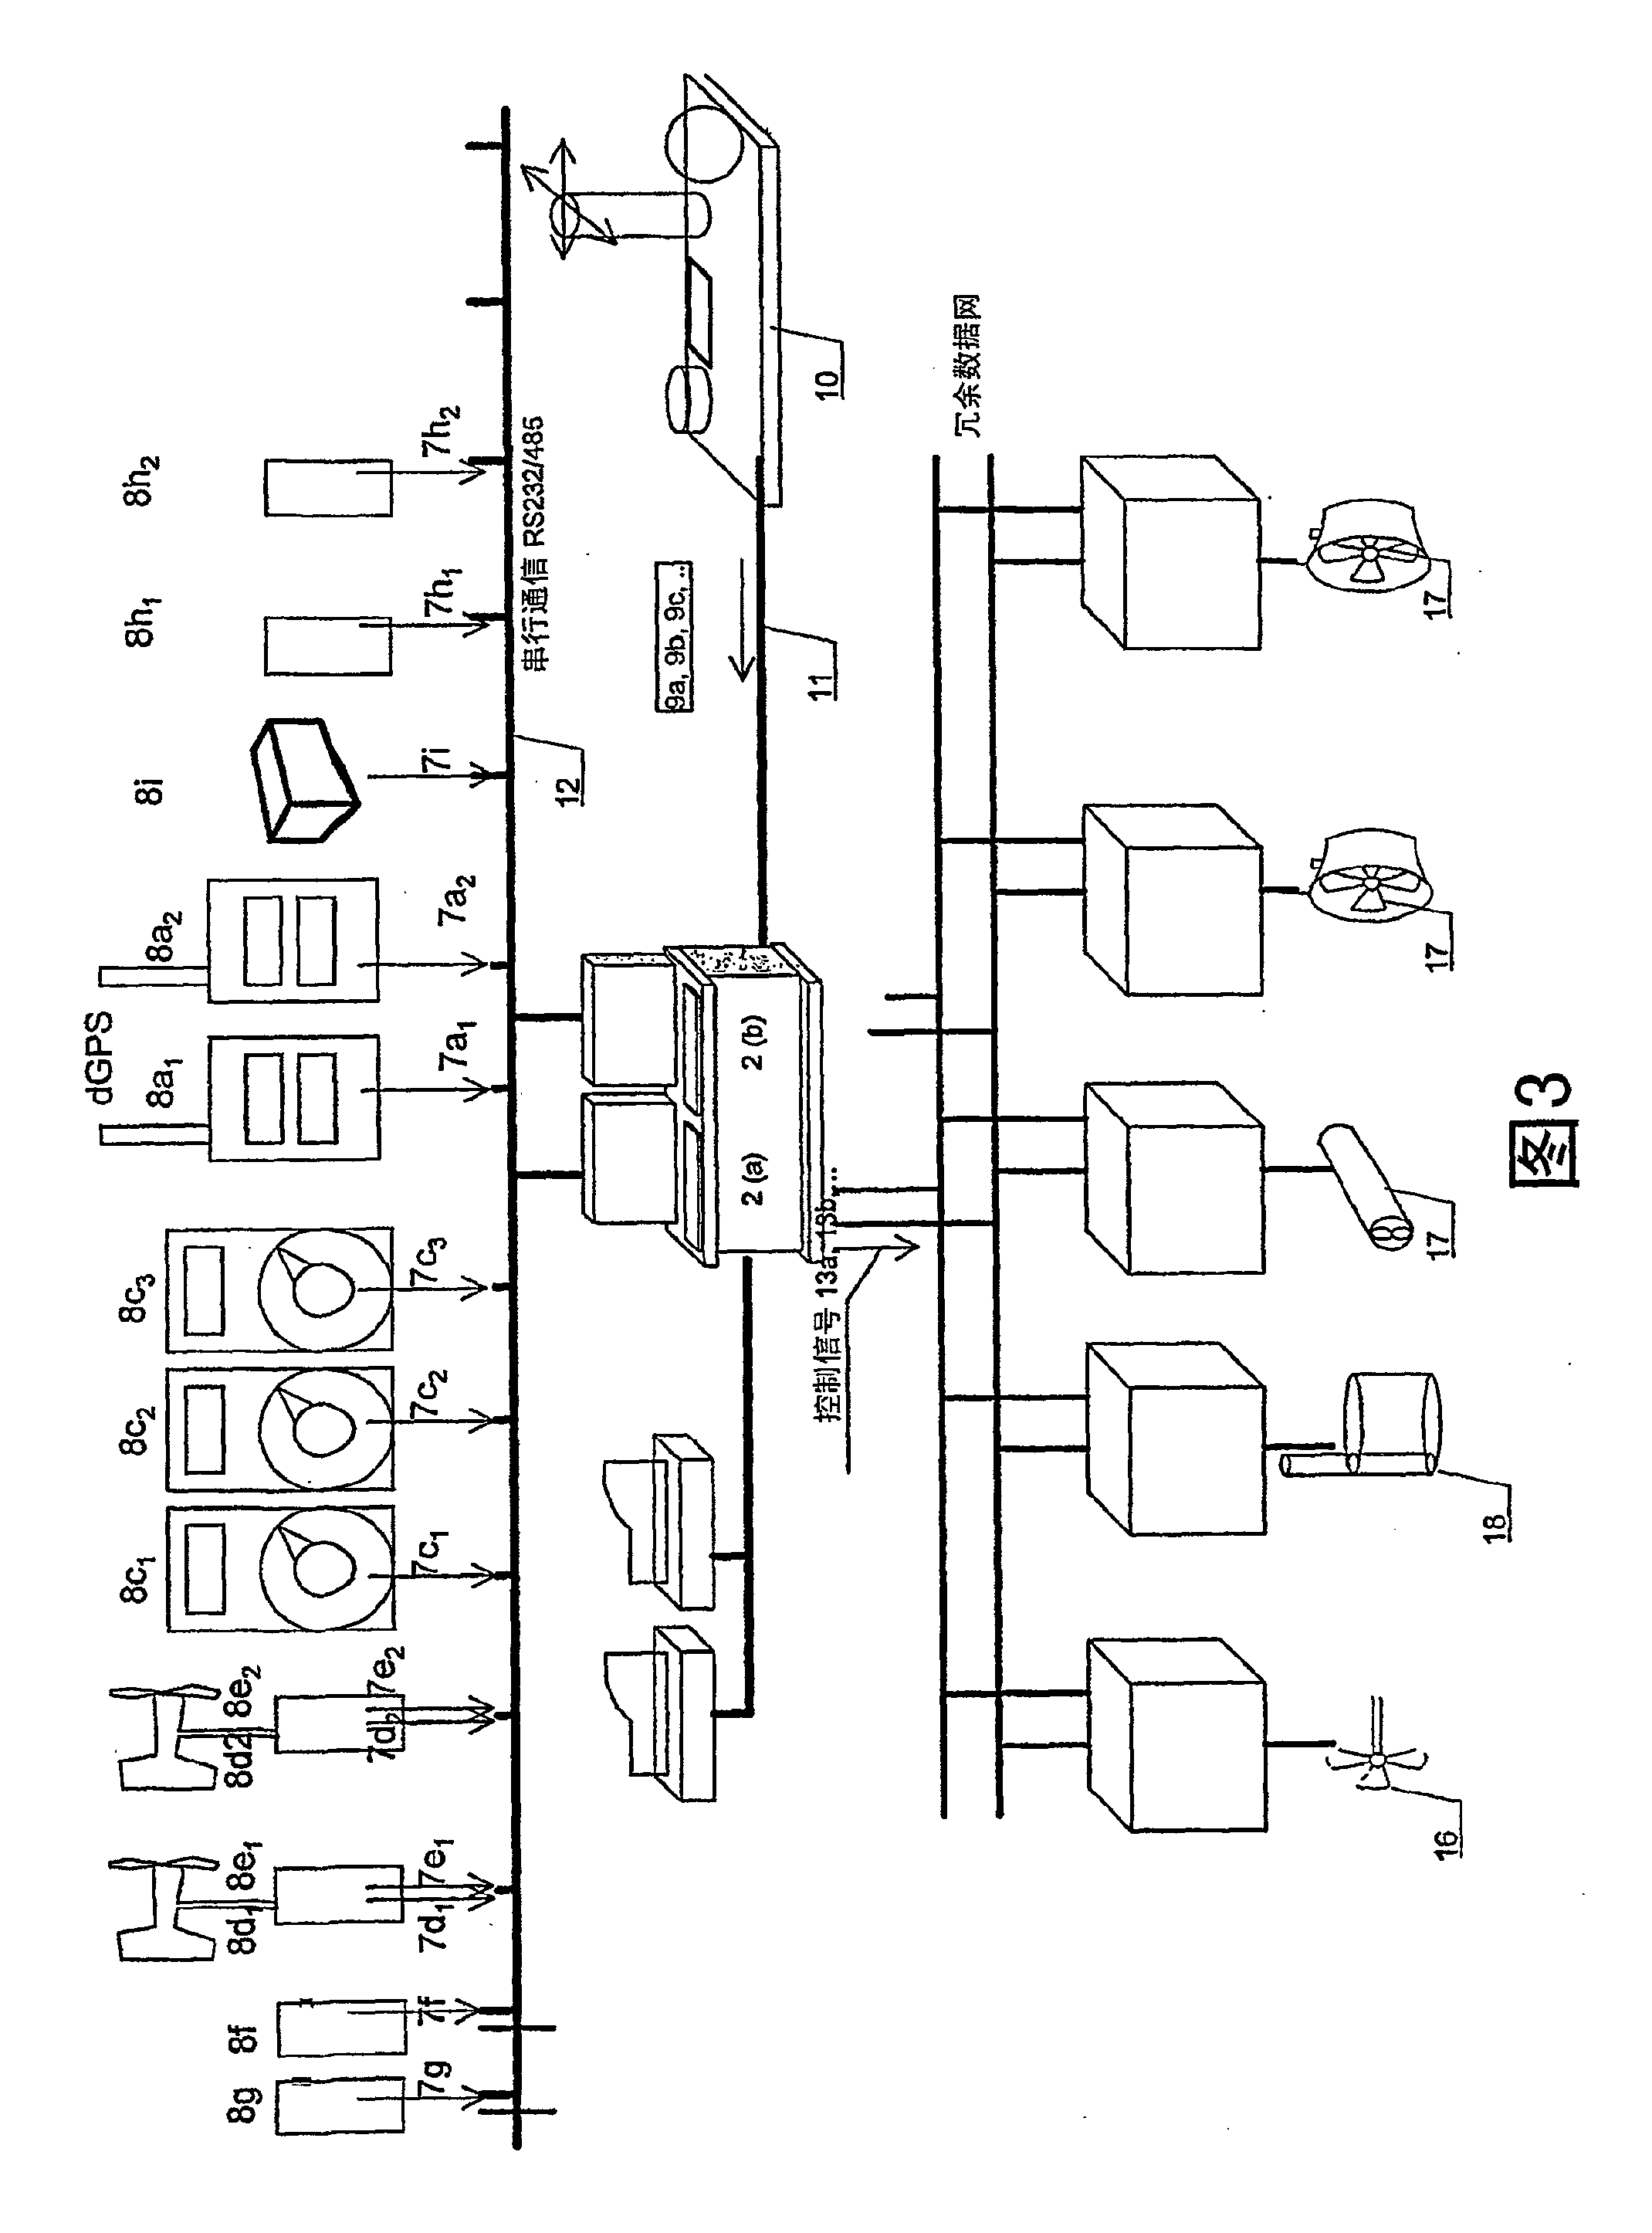 Method and system for testing a control system of a marine vessel